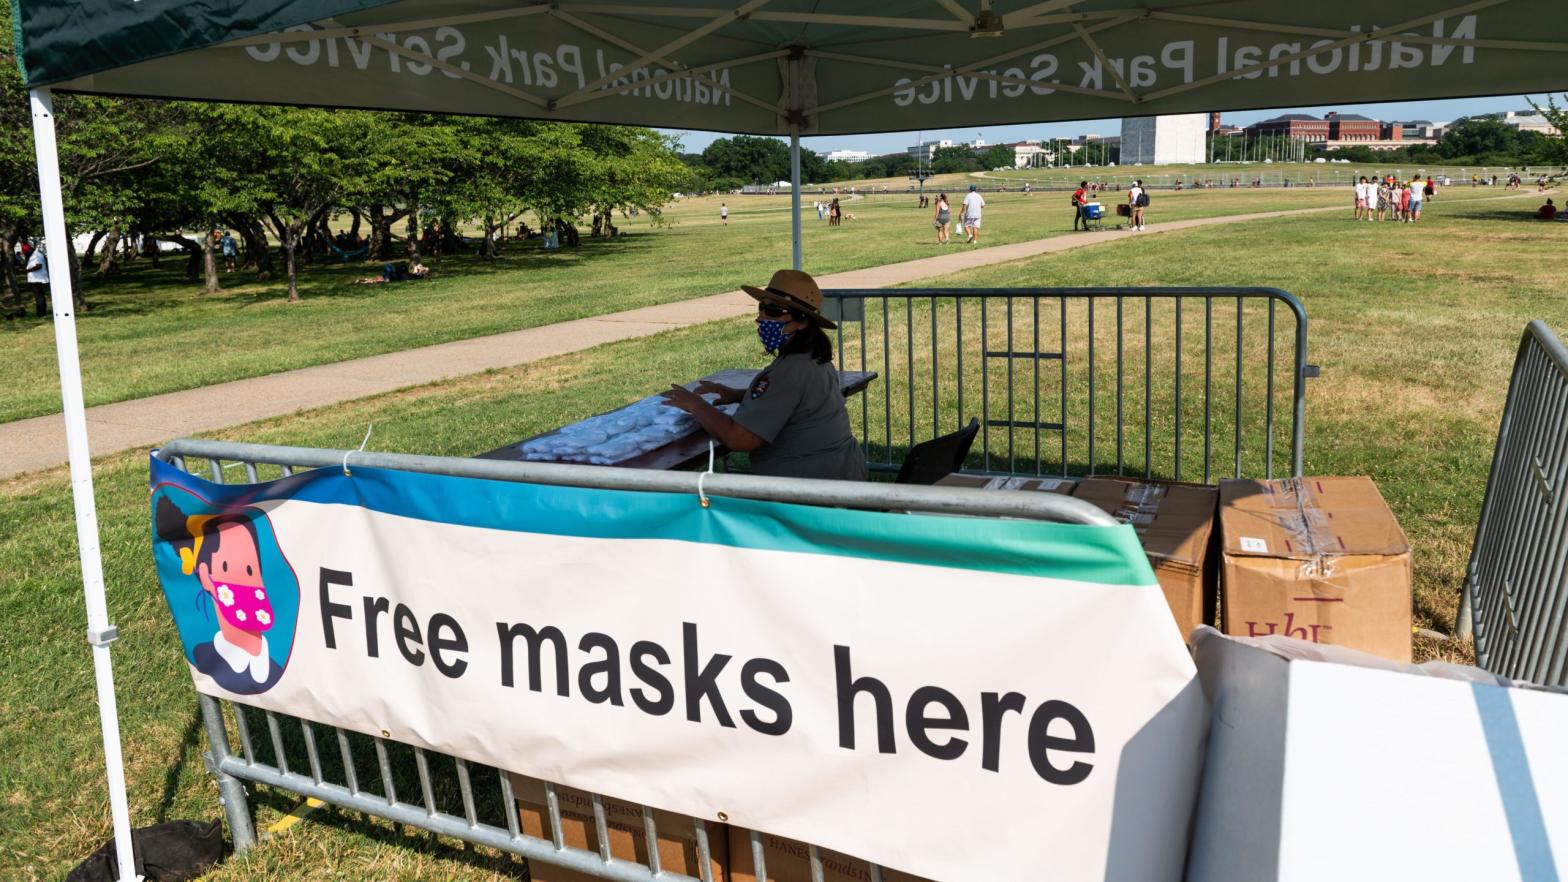 A U.S. Park Service Ranger preparing to distribute facemasks to people gathering near the Washington Memorial for Independence Day fireworks in Washington, DC on July 4, 2020.  (Photo: Roberto Schmidt, Getty Images)